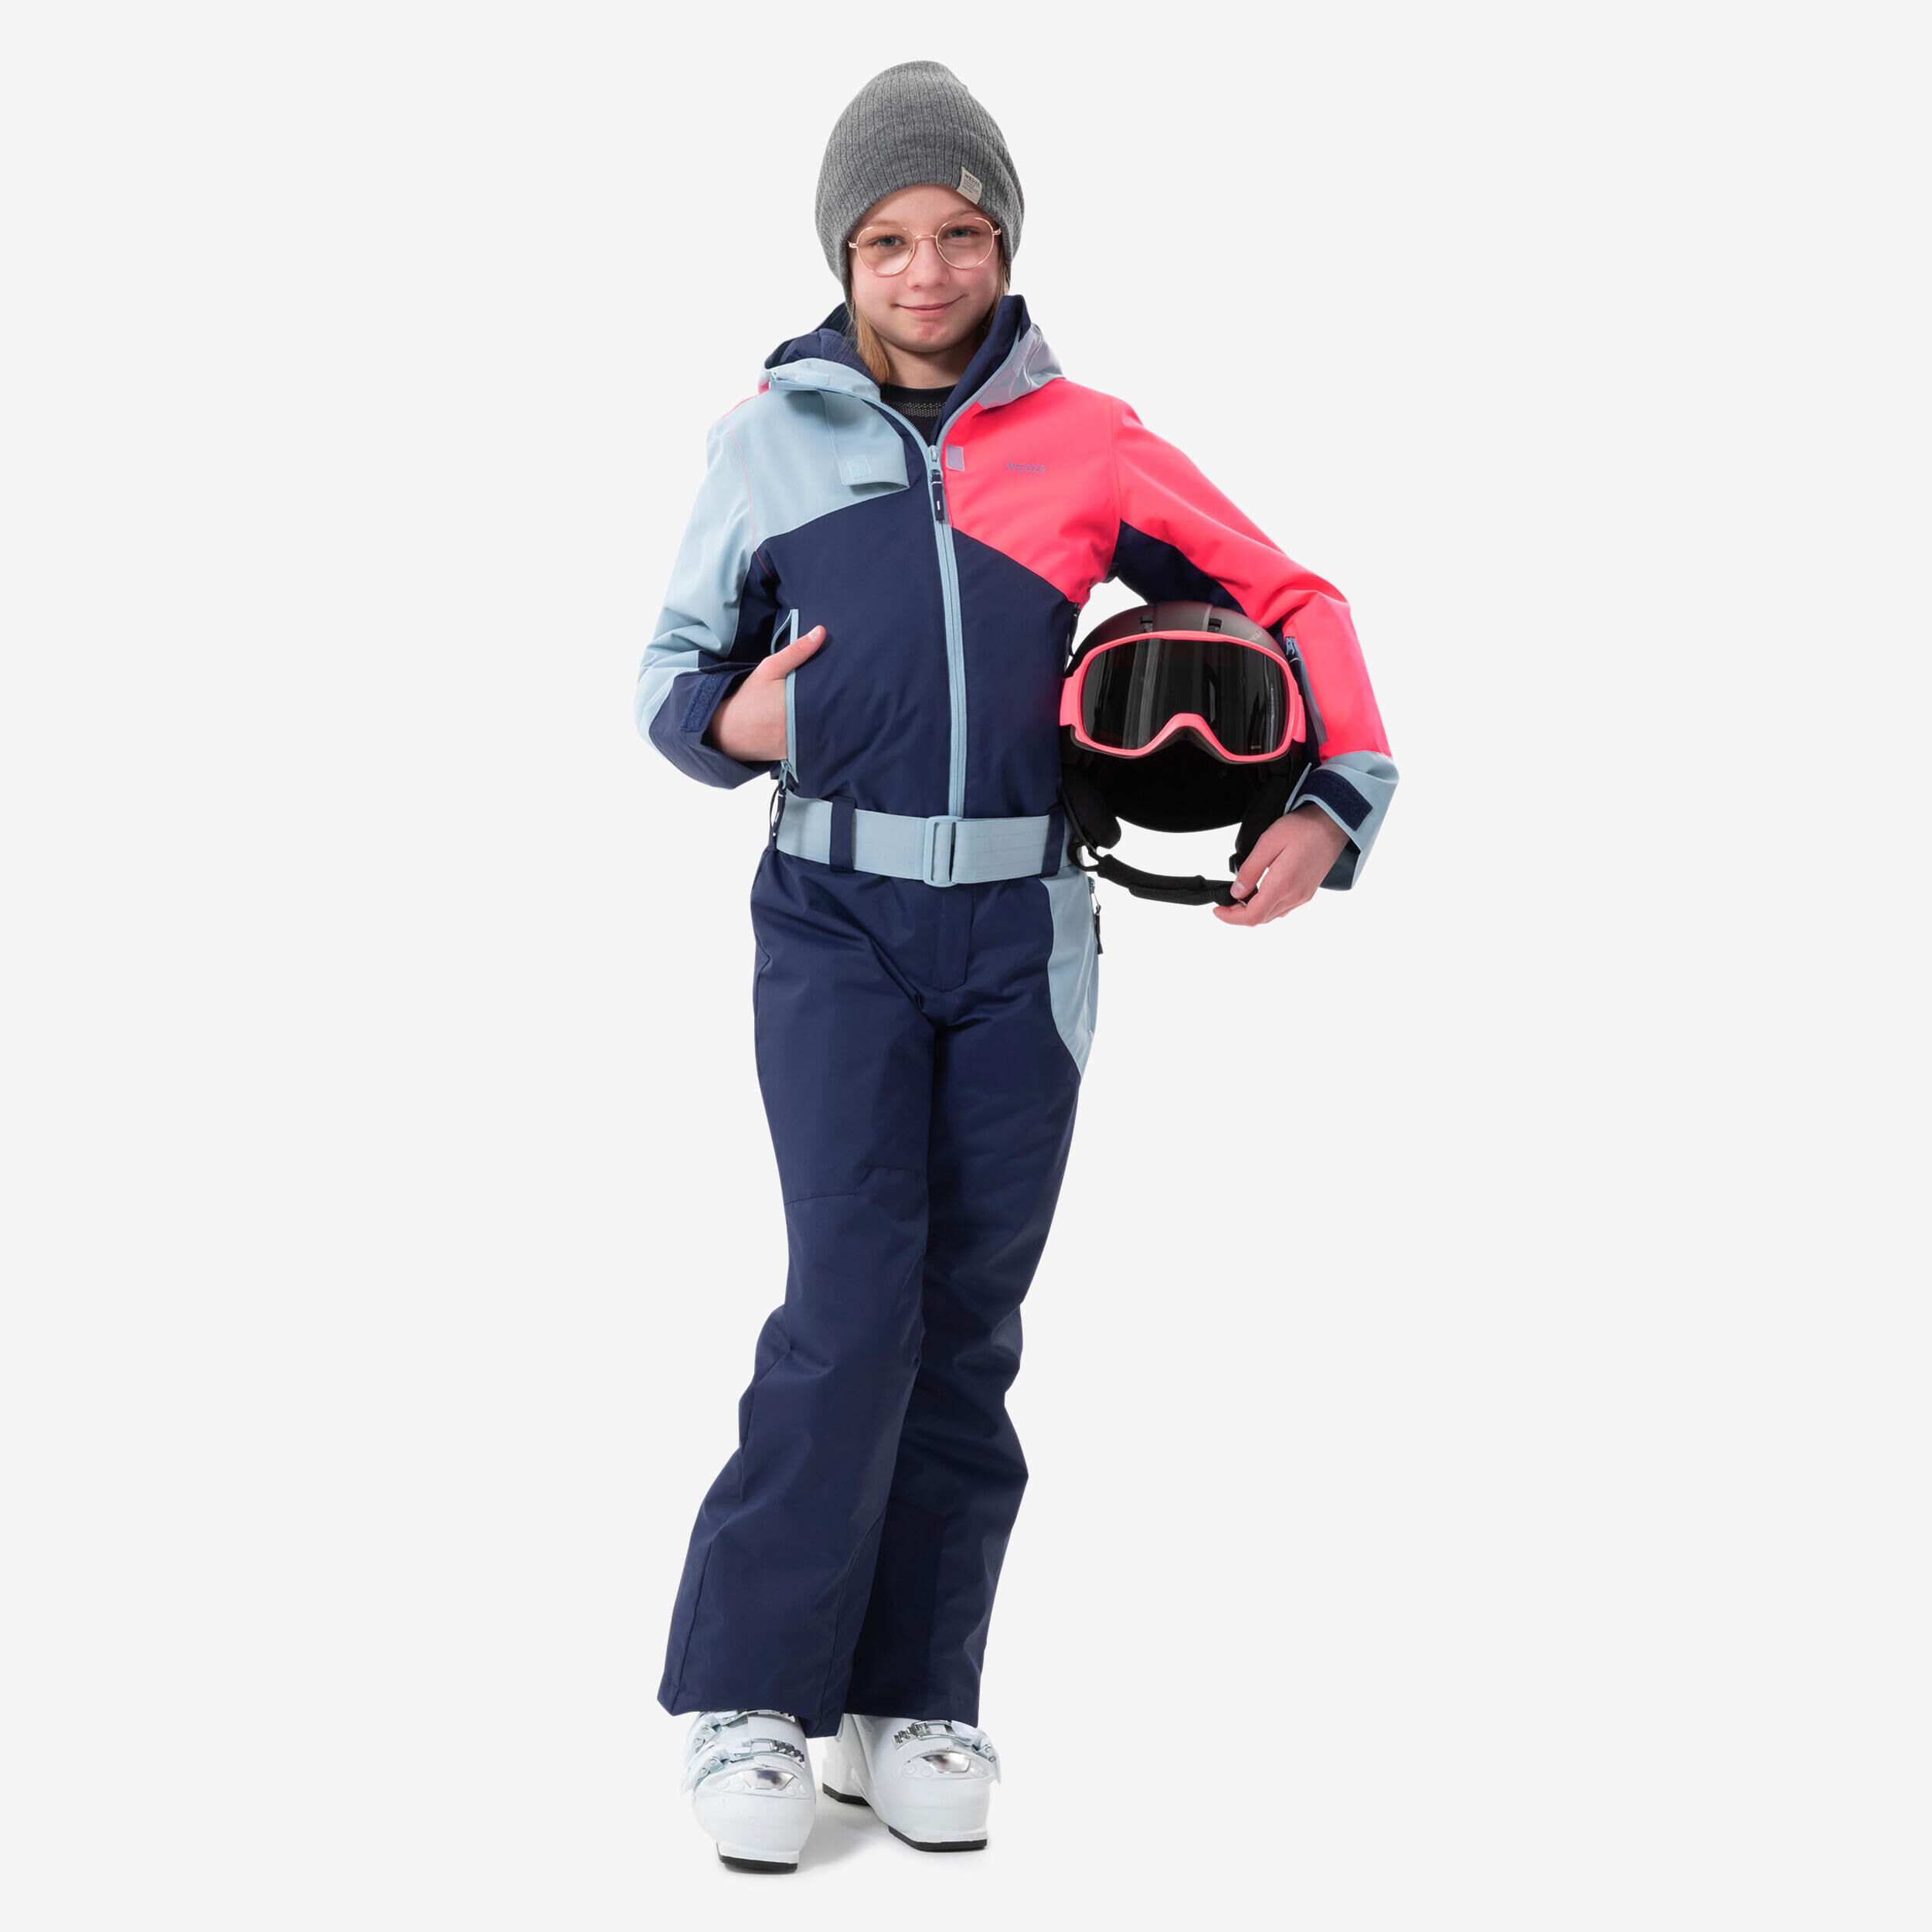 WEDZE KIDS’ WARM AND WATERPROOF SKI SUIT 500 PINK AND BLUE